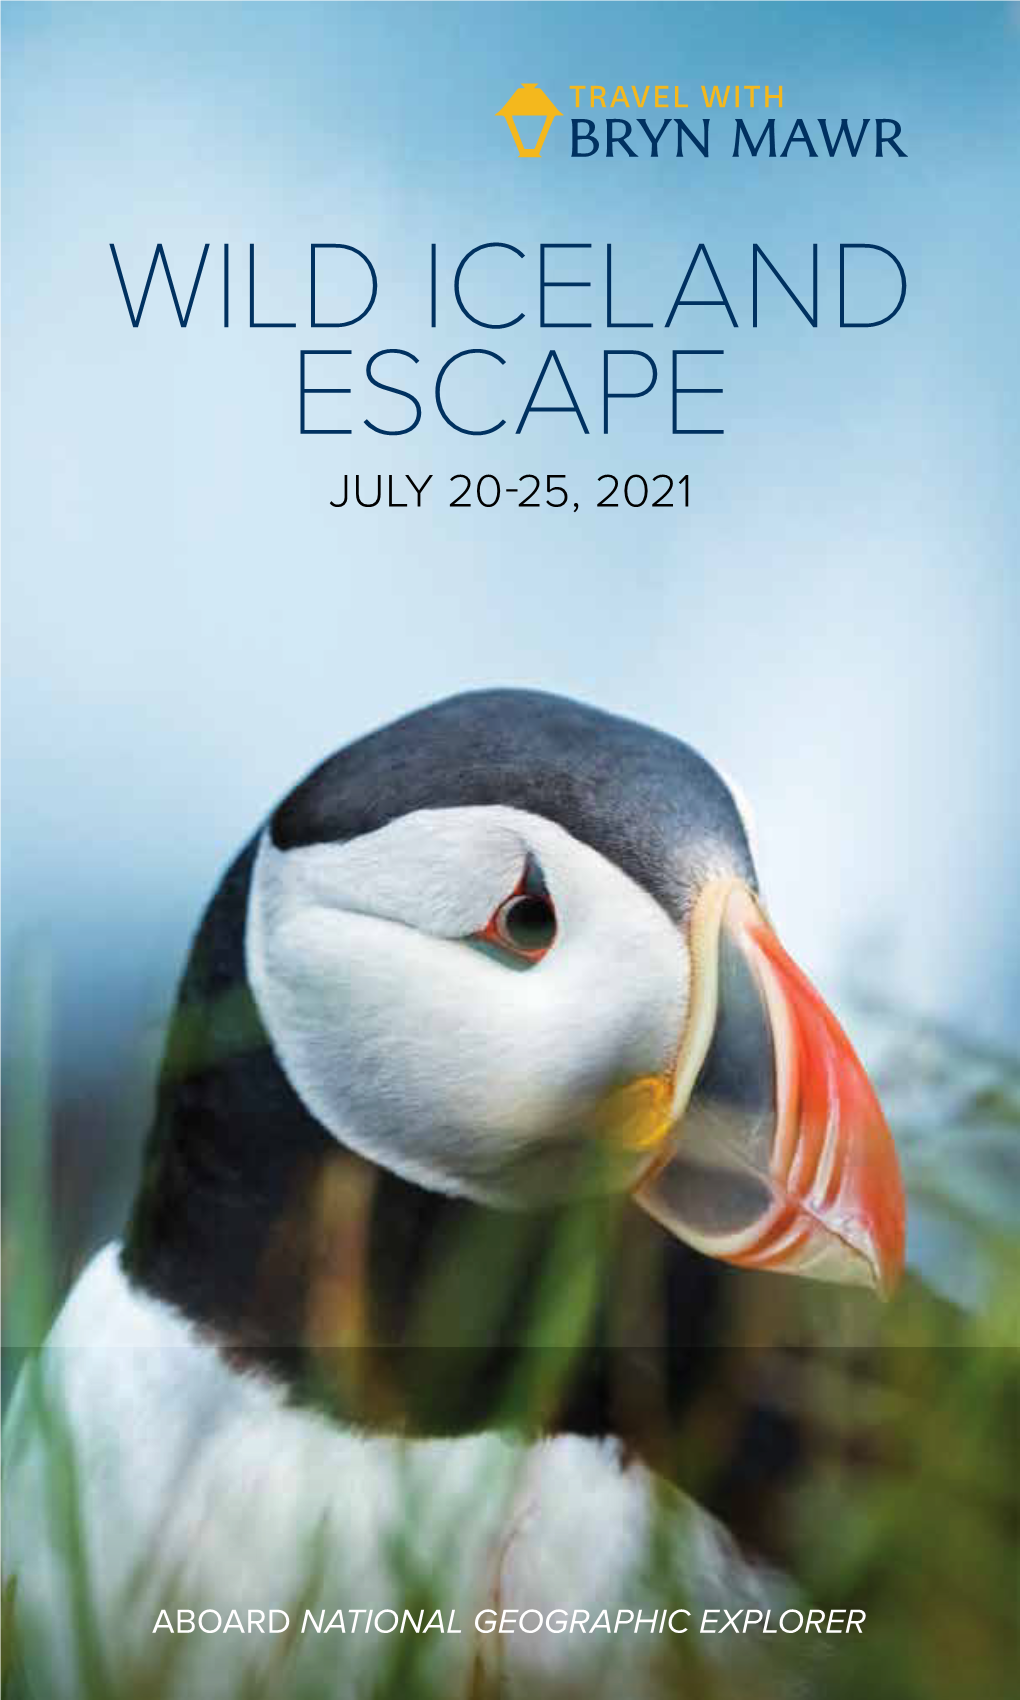 Iceland Escape July 20-25, 2021